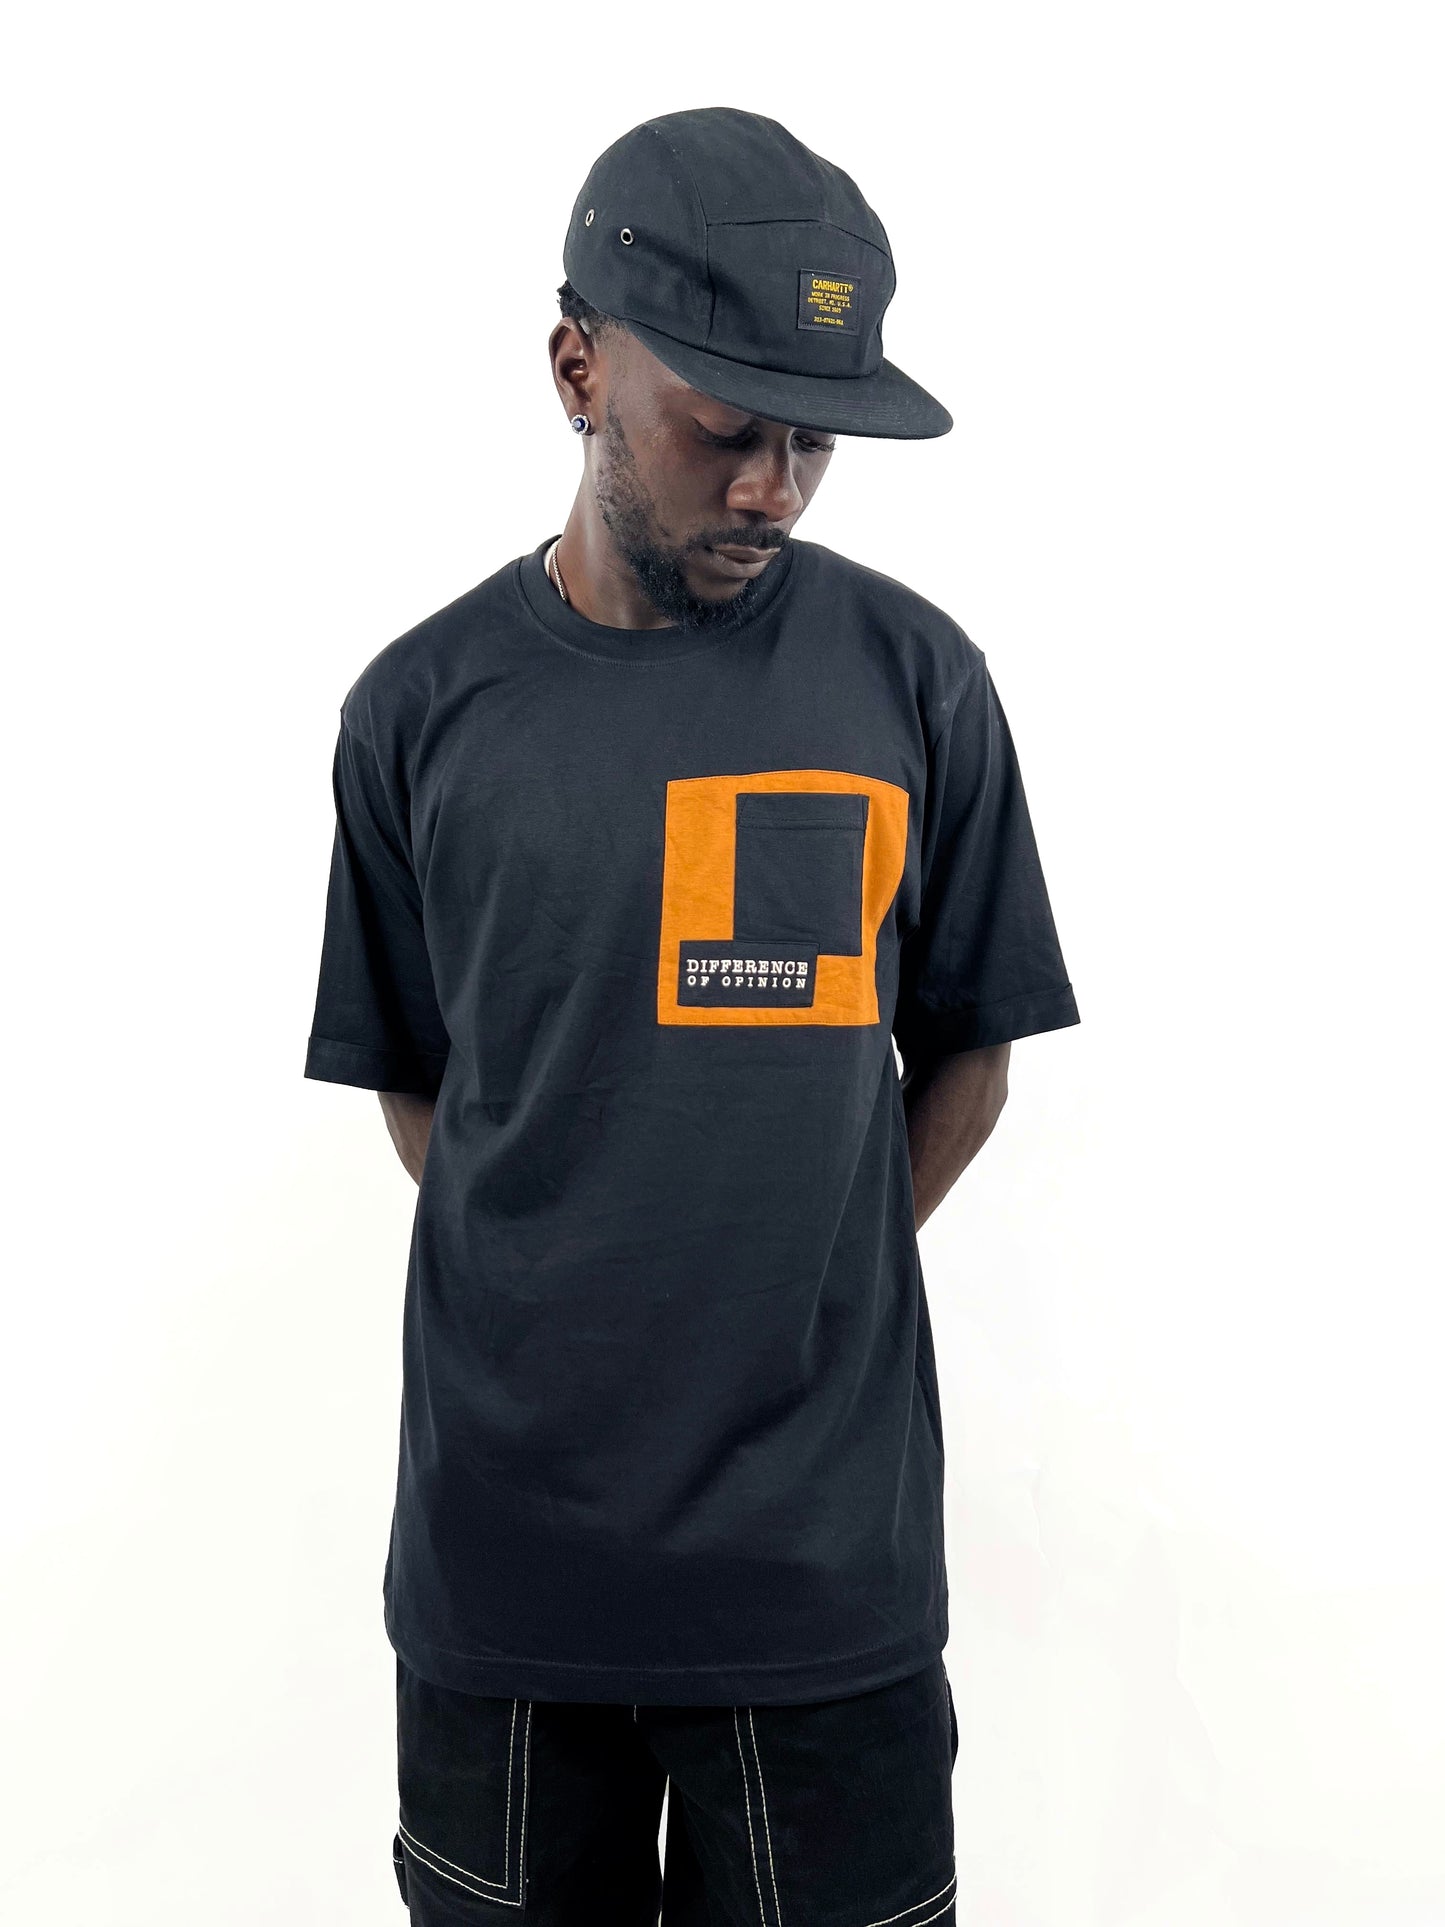 Difference of Opinion Oversized pocket patch T-shirt in black